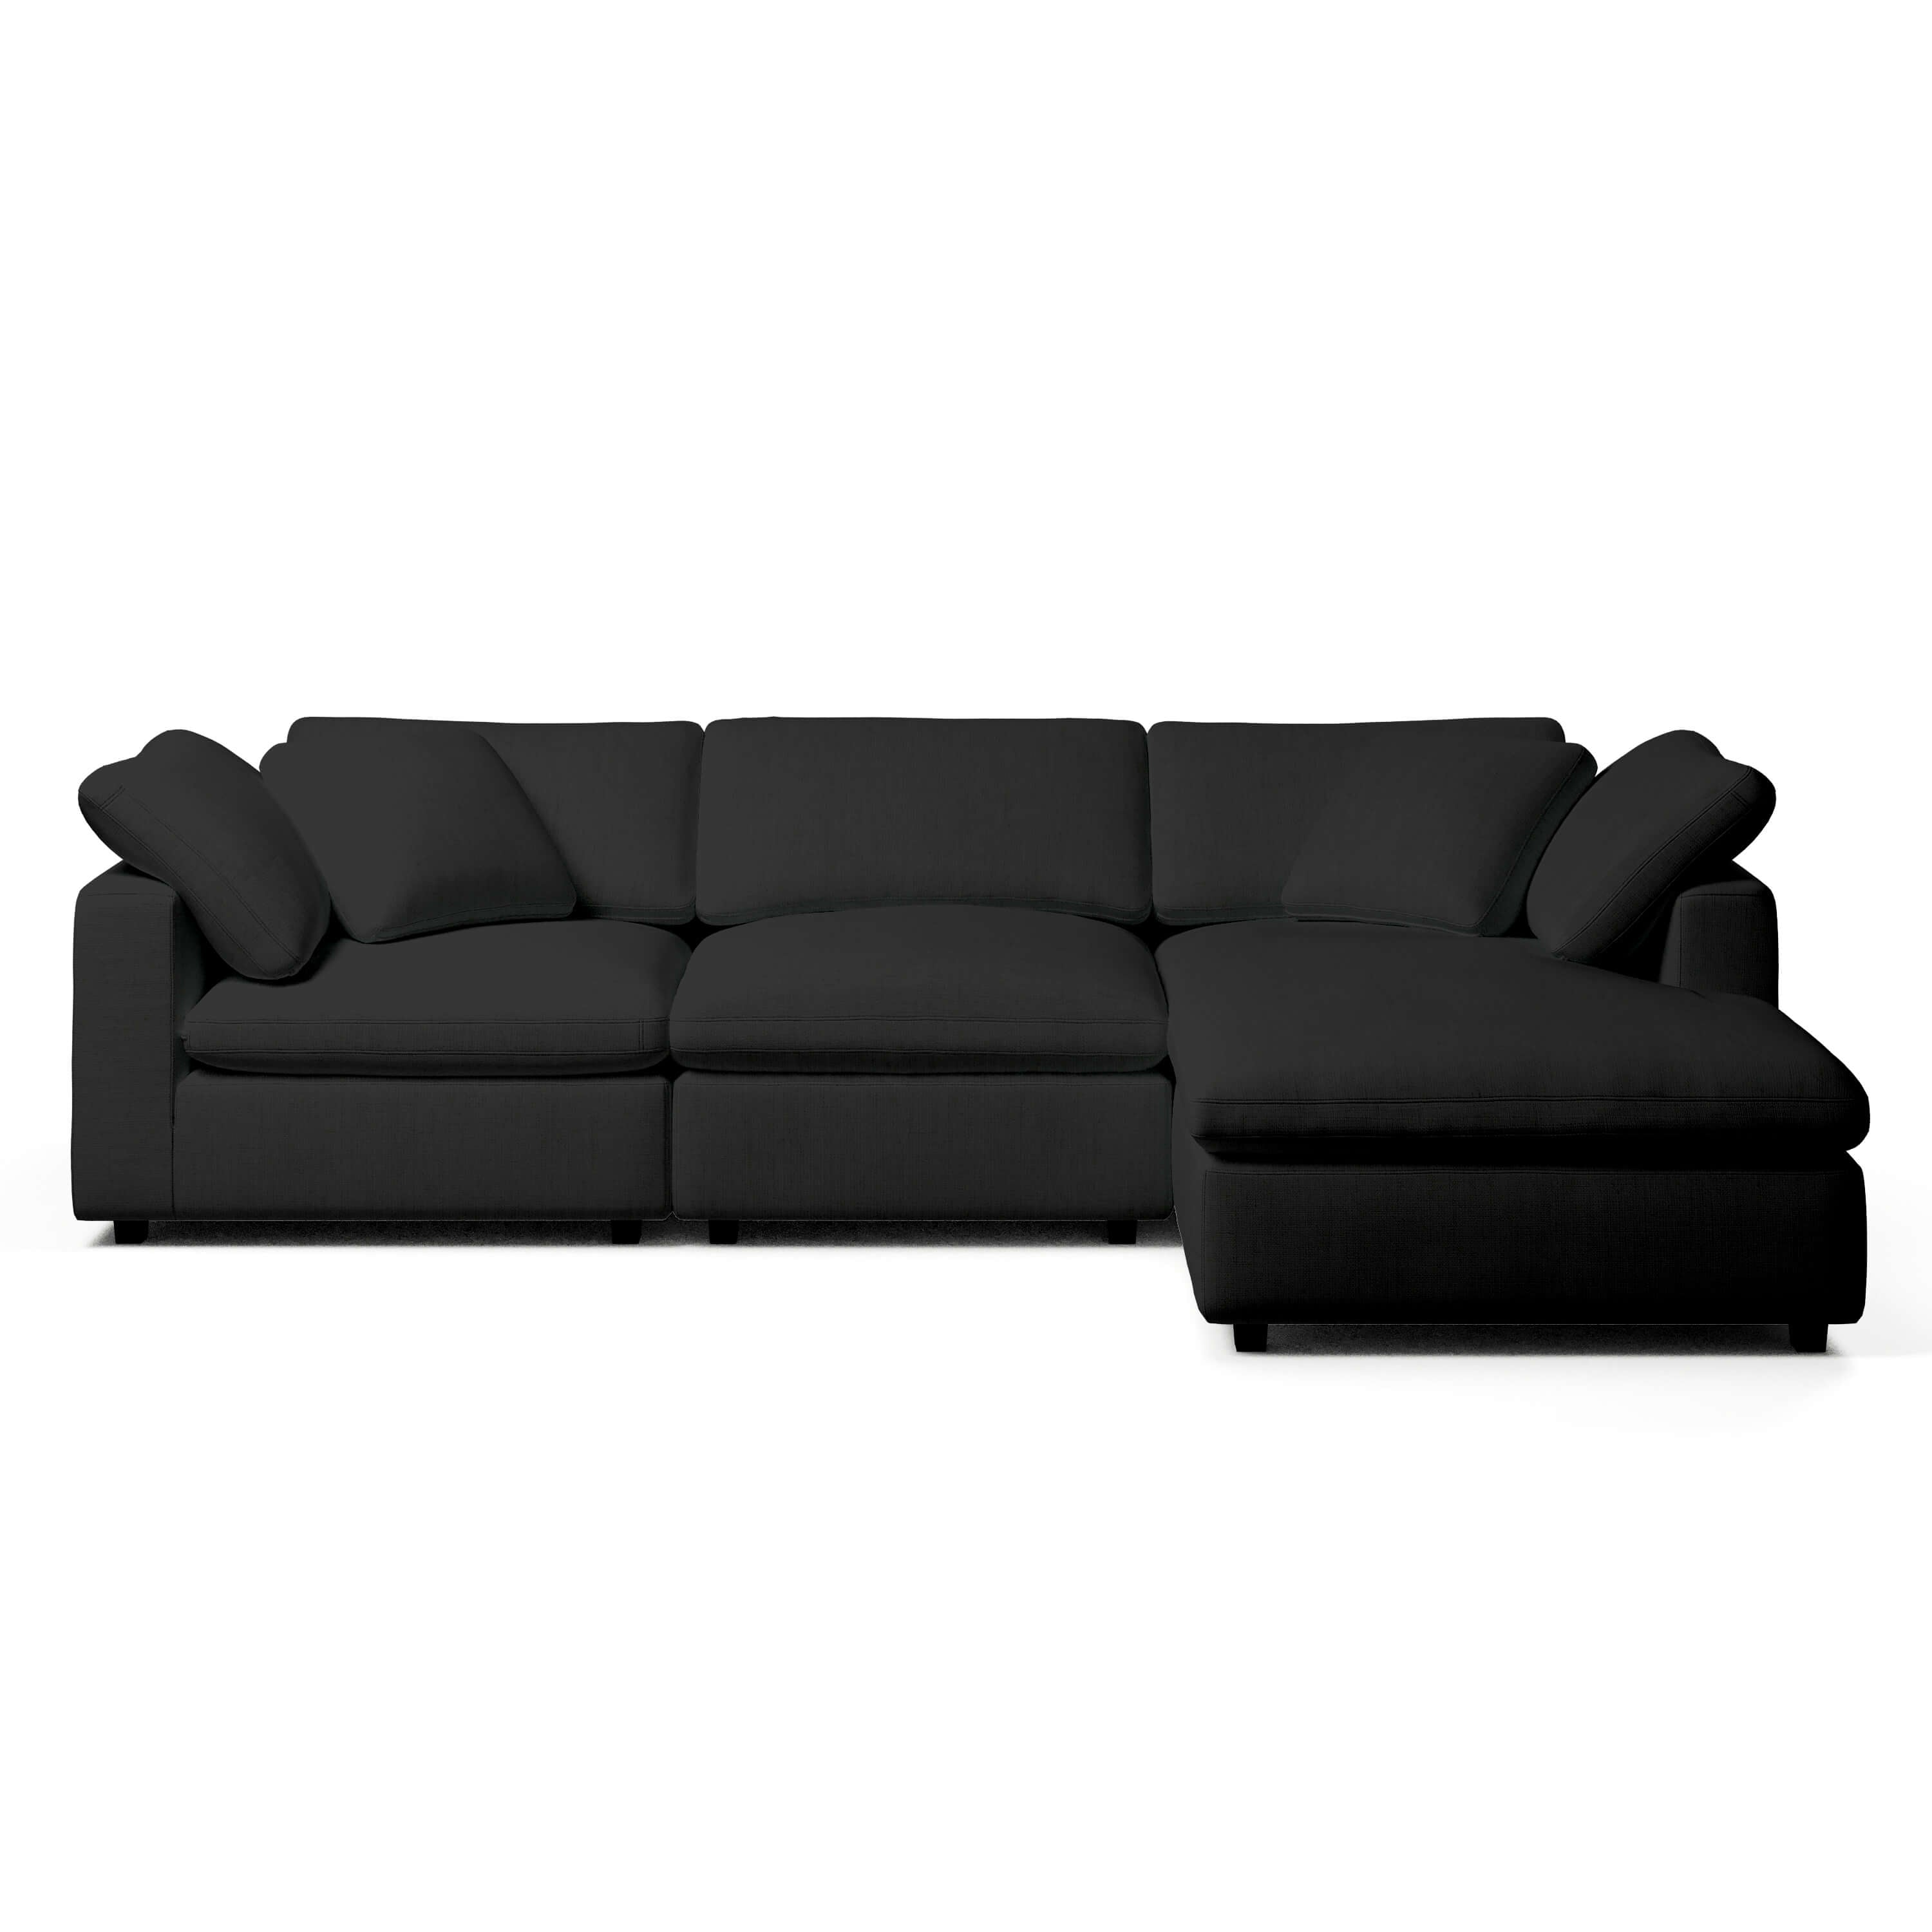 Comfy Modular Sofa - 3-Seater Chaise - Right Hand Facing